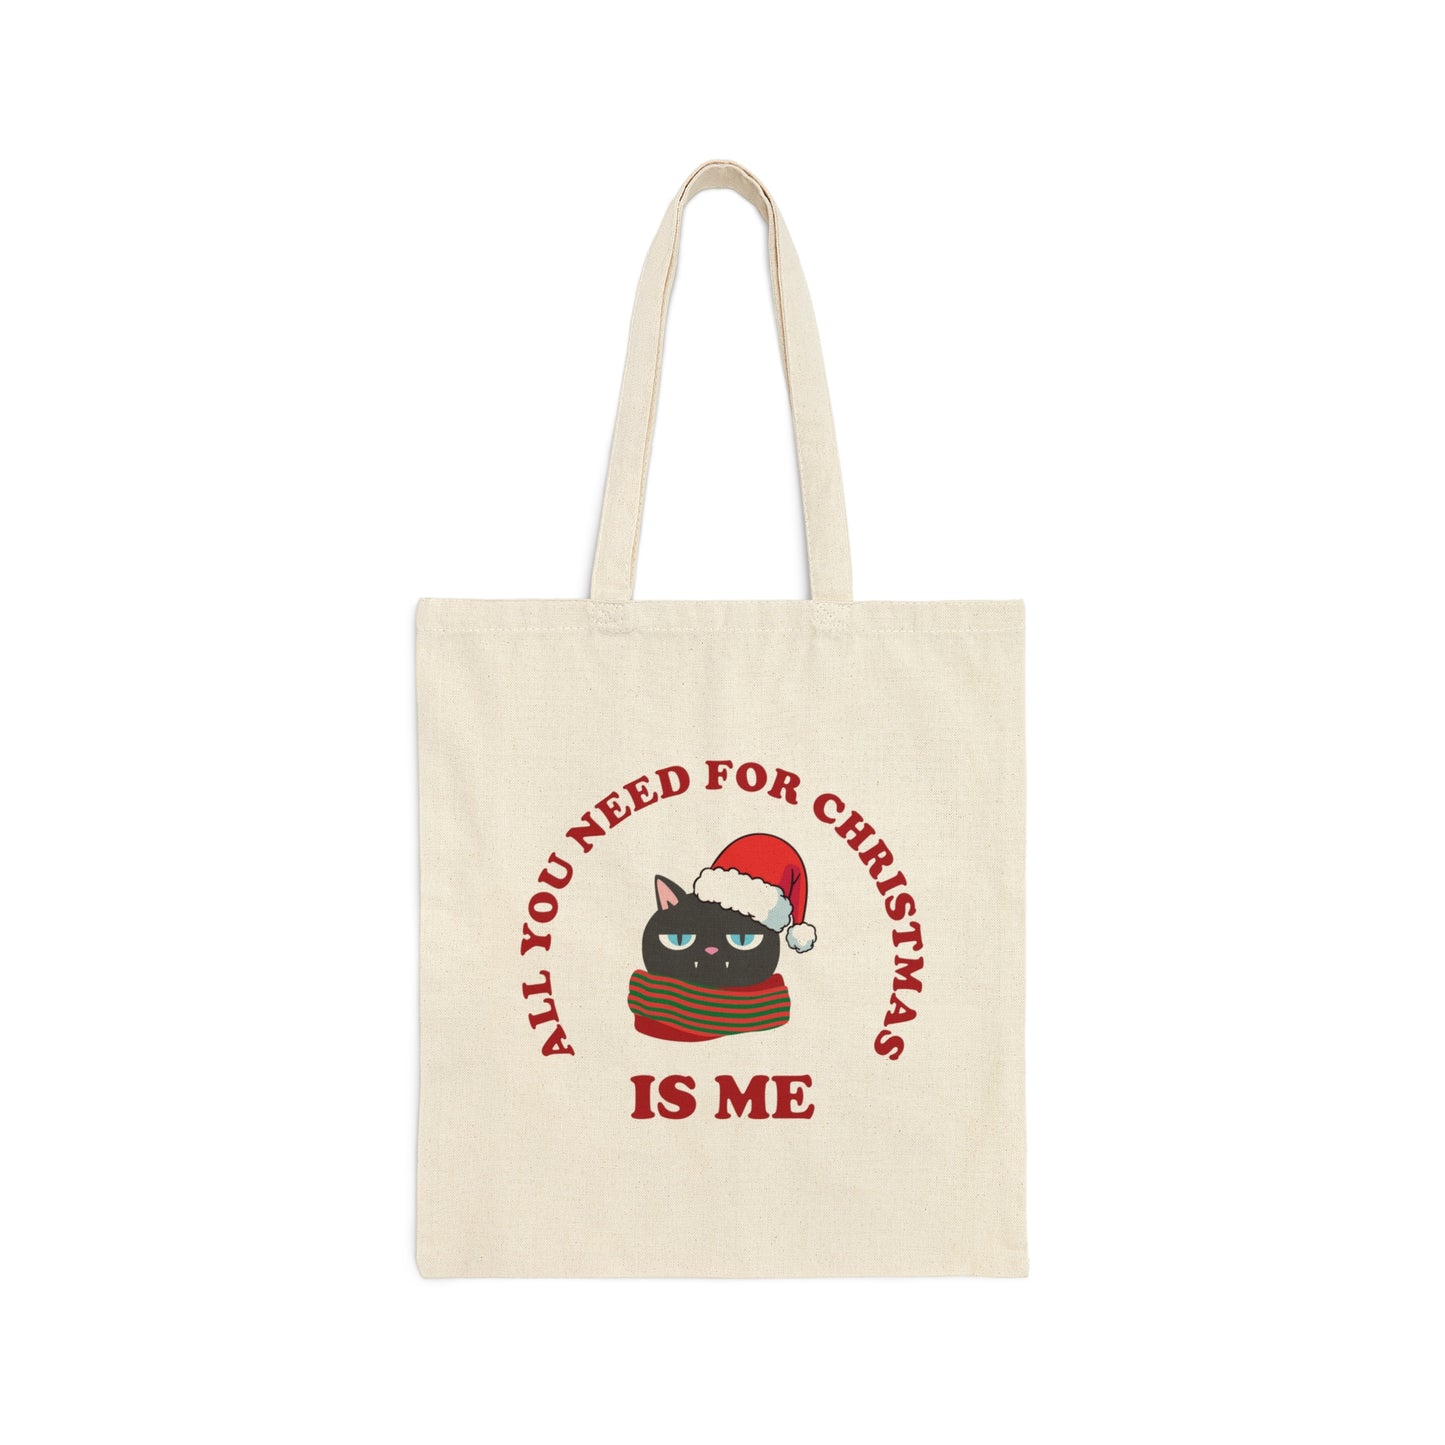 All You Need for Christmas is Me Grumpy Cat Canvas Shopping Cotton Tote Bag